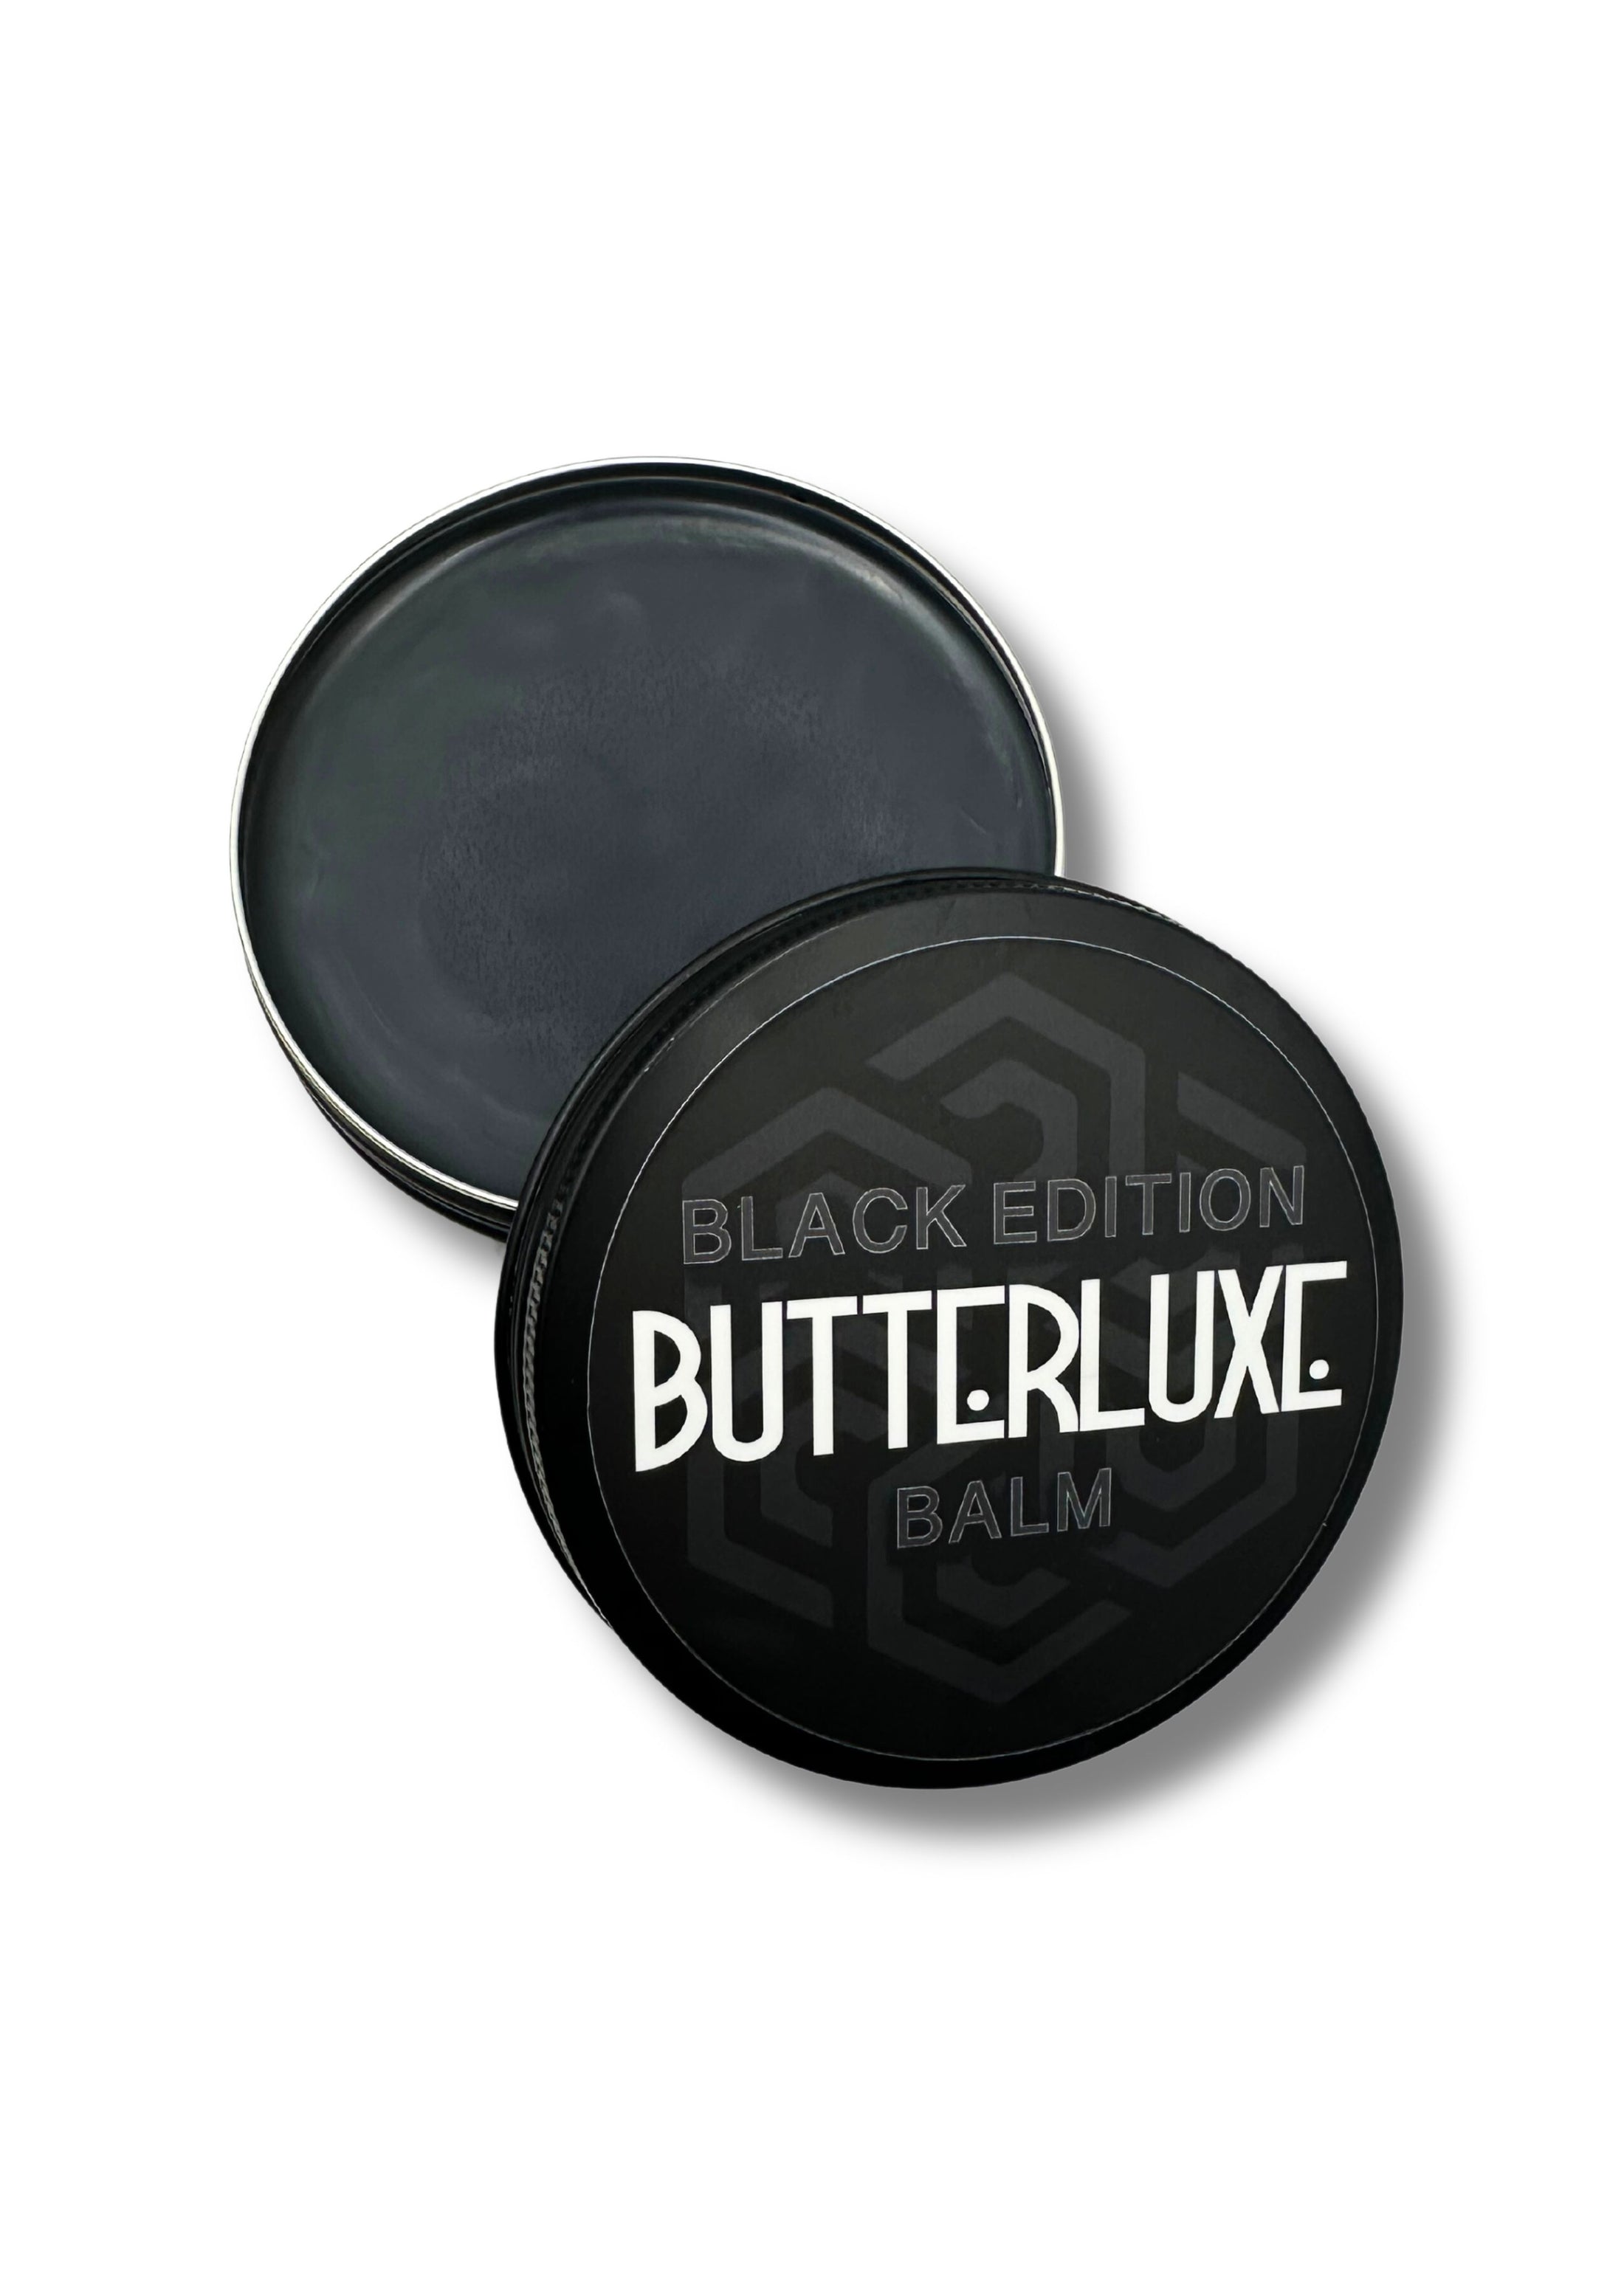 Butterluxe Introduction